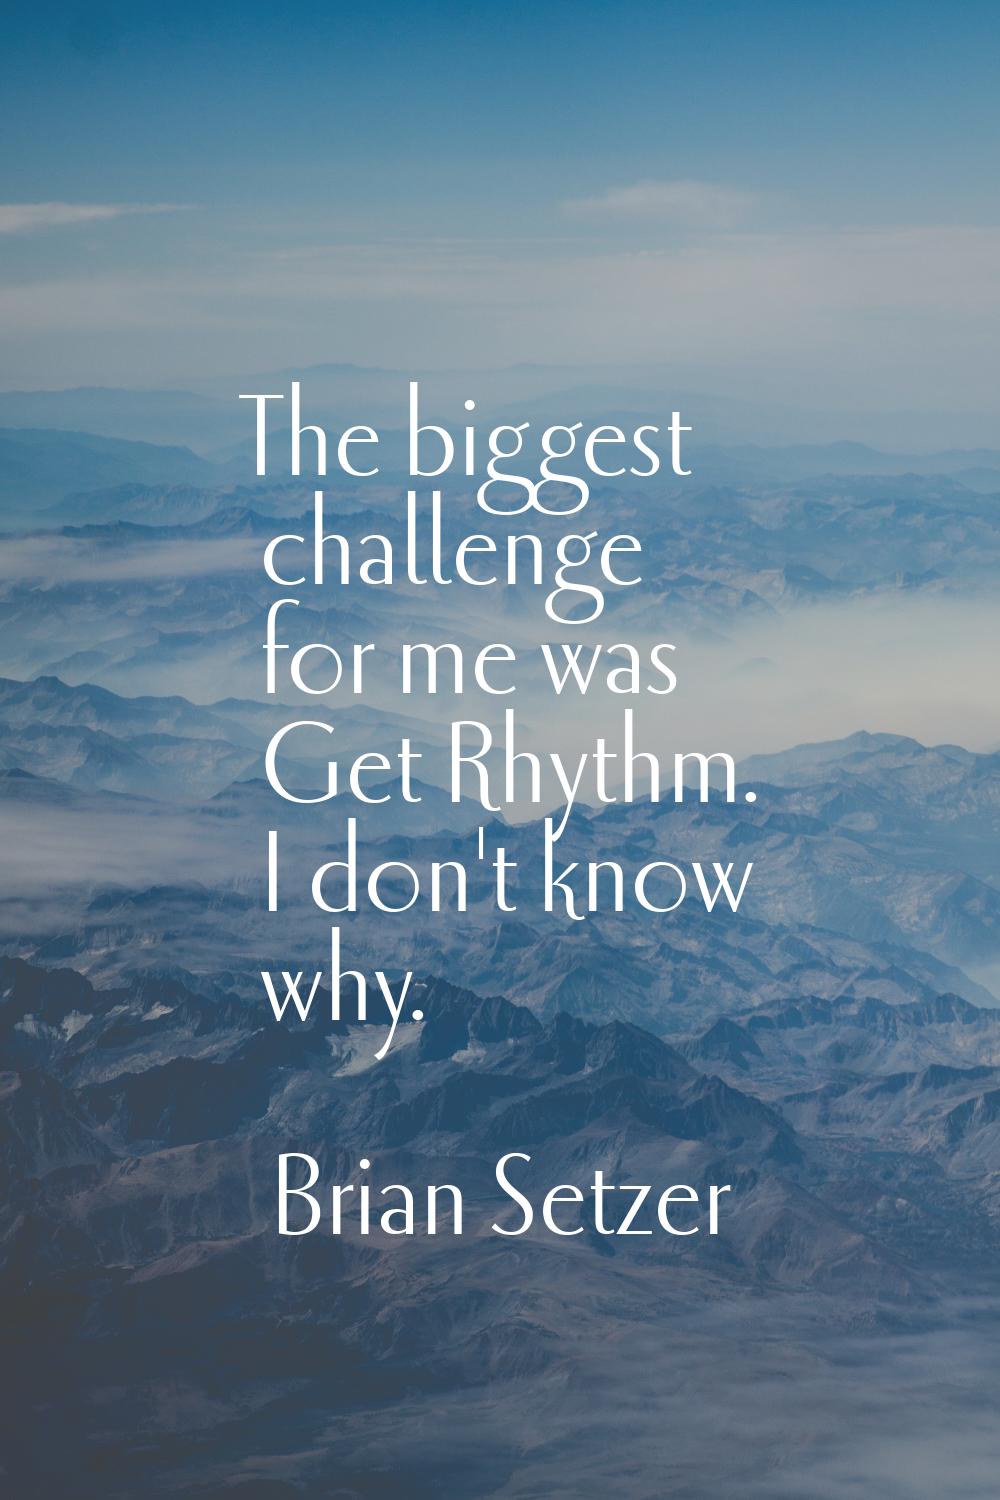 The biggest challenge for me was Get Rhythm. I don't know why.